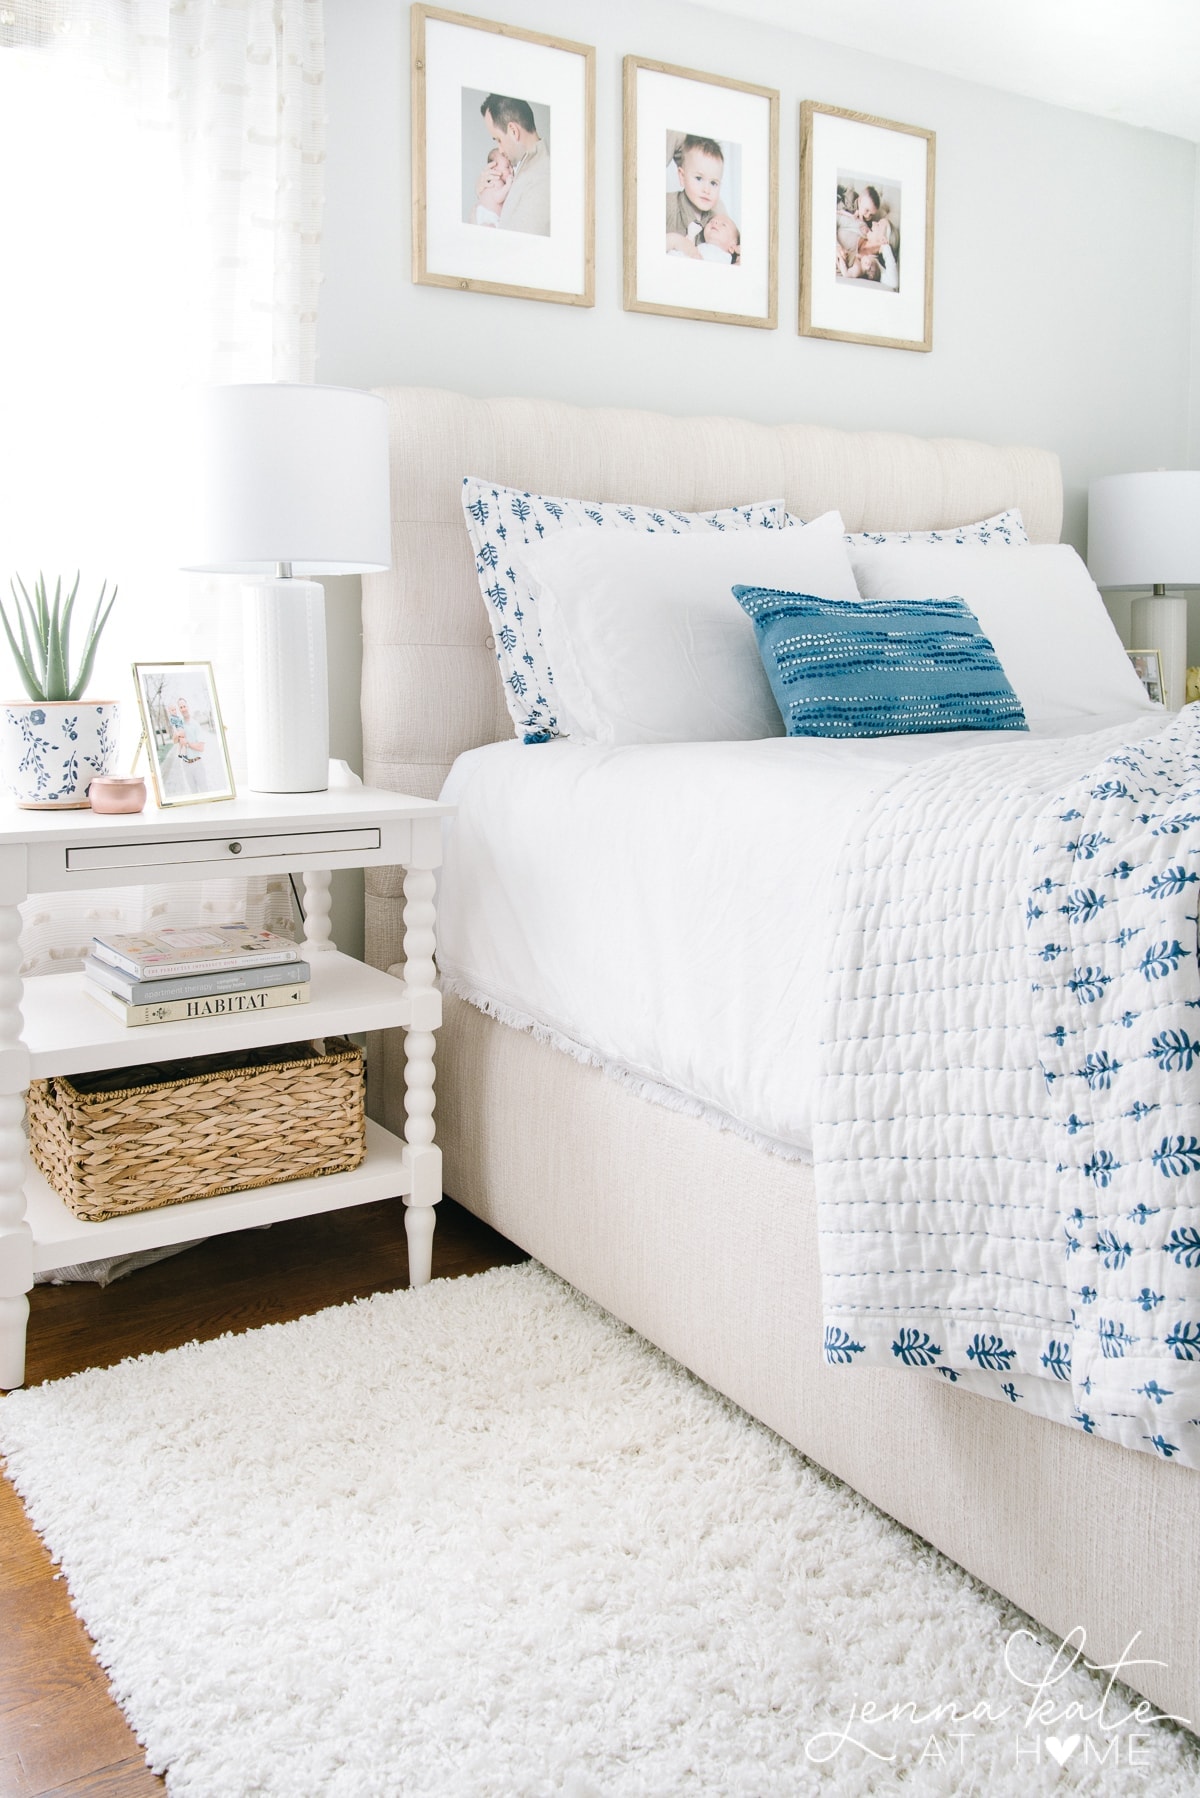 2019 Summer Home Tour featuring this light and bright master bedroom